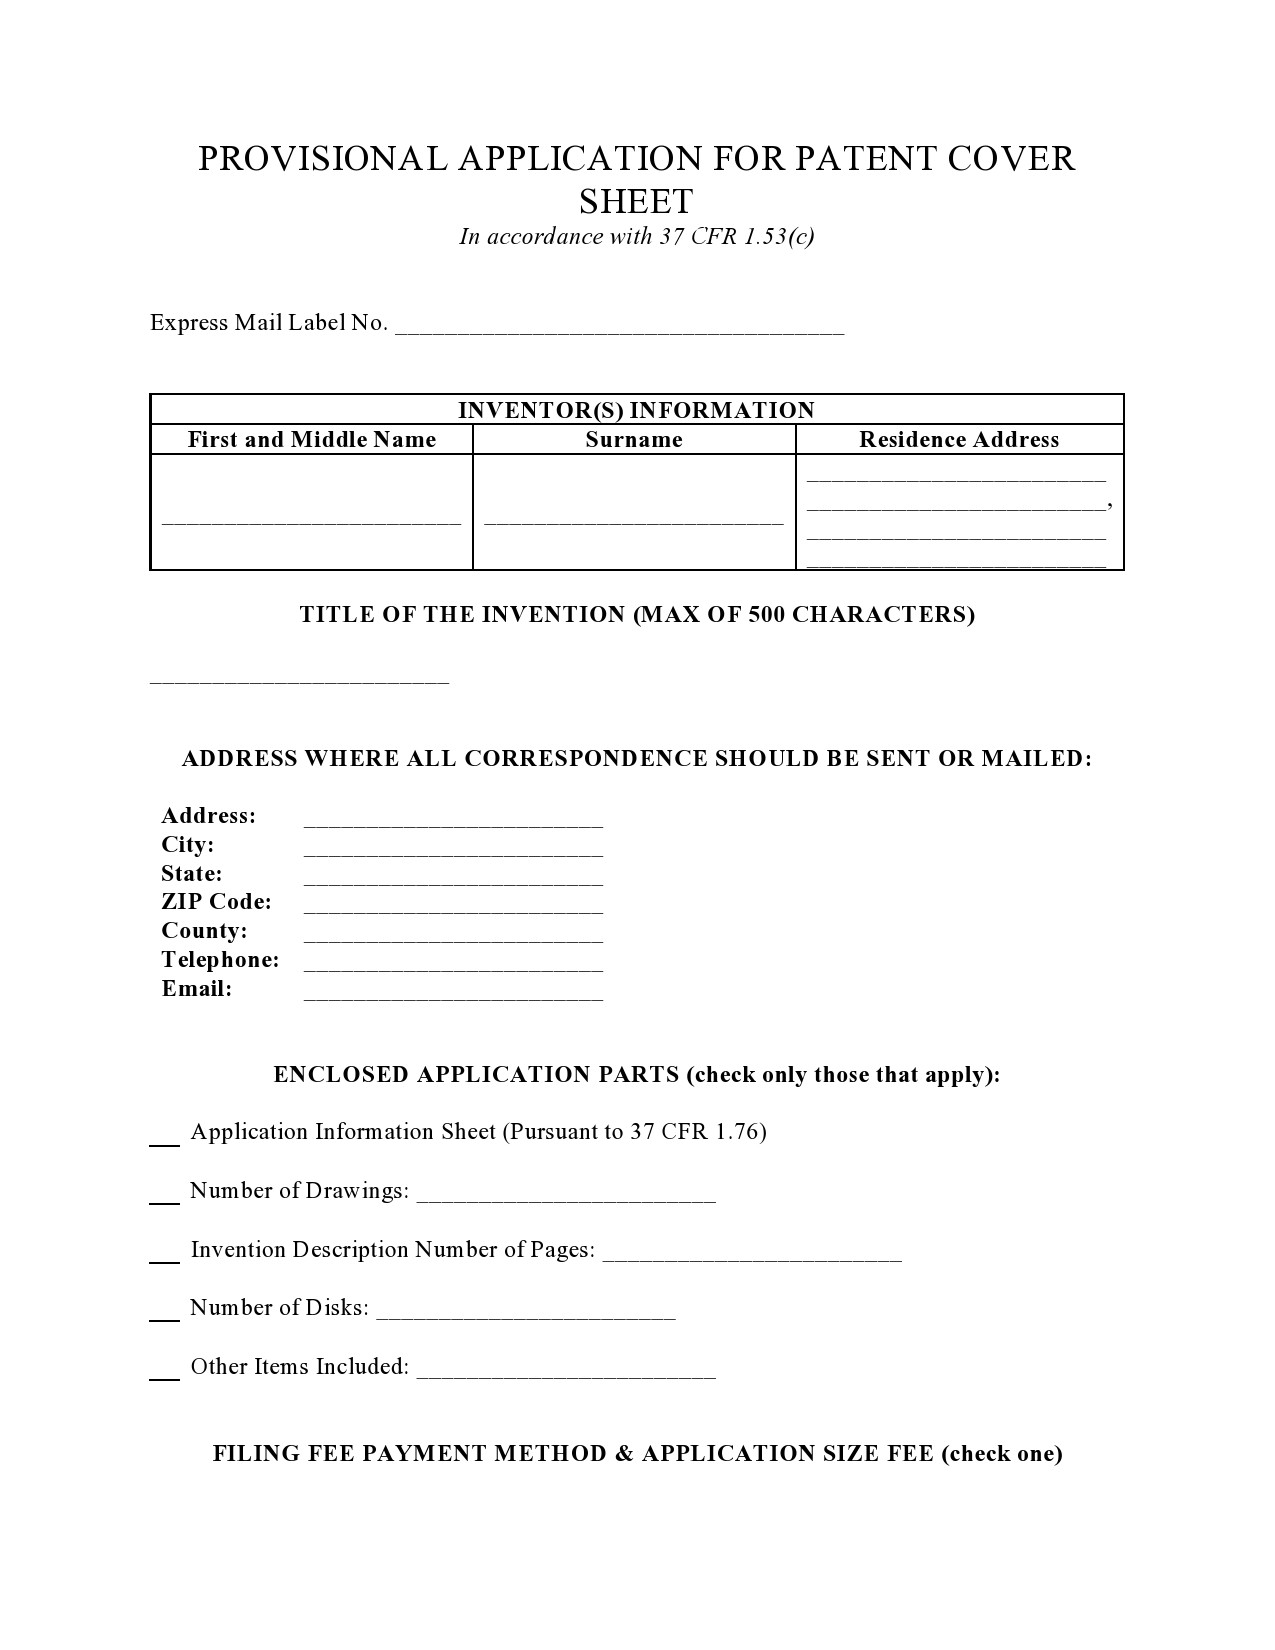 Free provisional patent application template 02